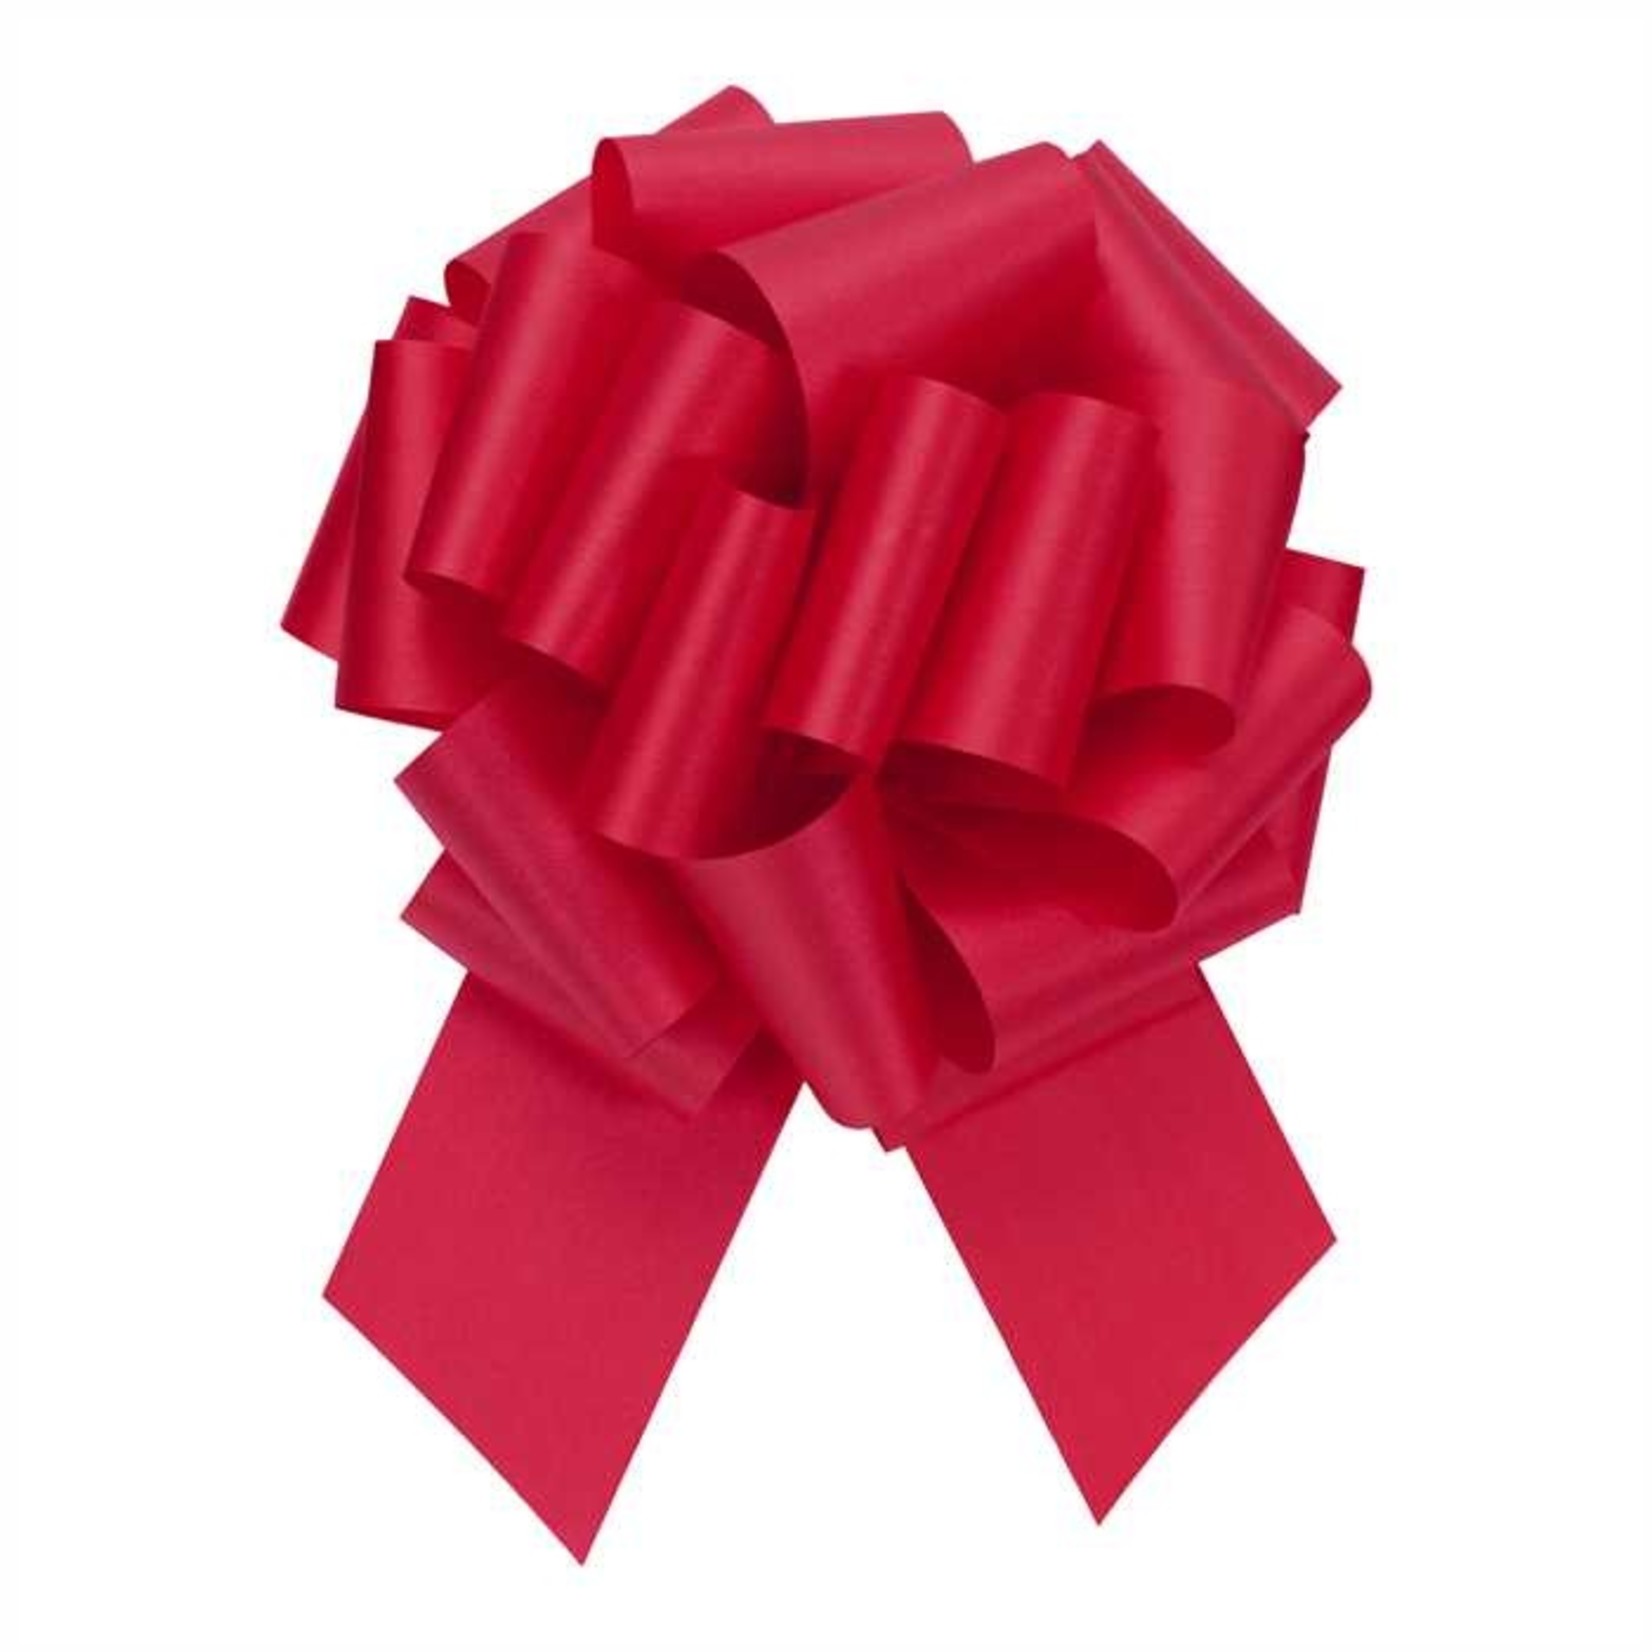 PERFECT BOW  #9 IMPERIAL RED, 1.5” ribbon width, 5.5" bow size, 20 loops